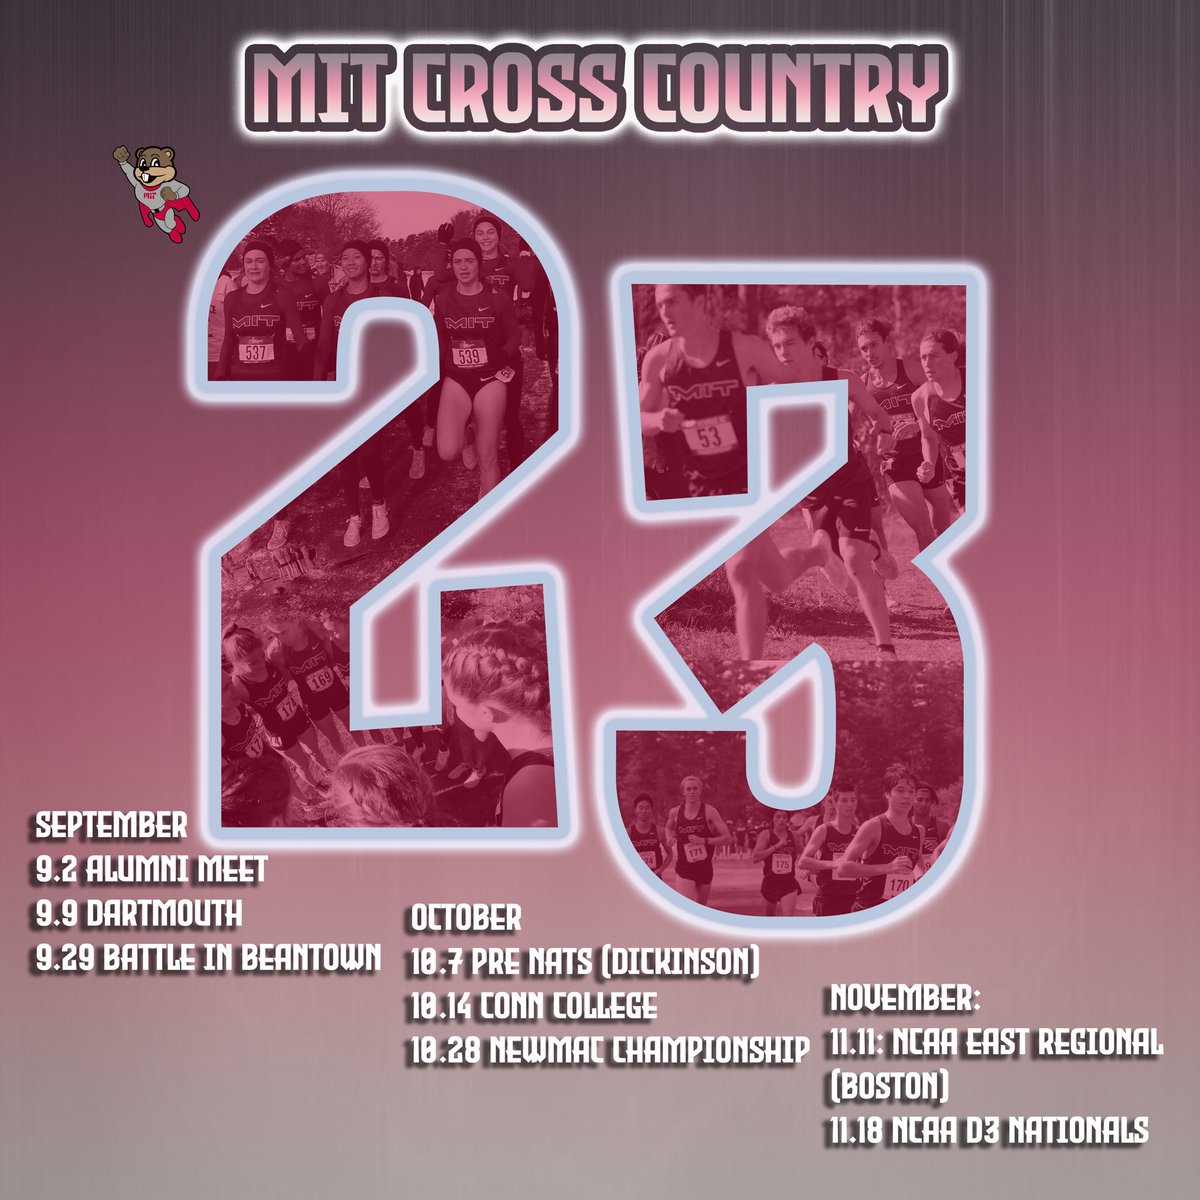 Check out the 23 XC schedule! It’s almost go time.